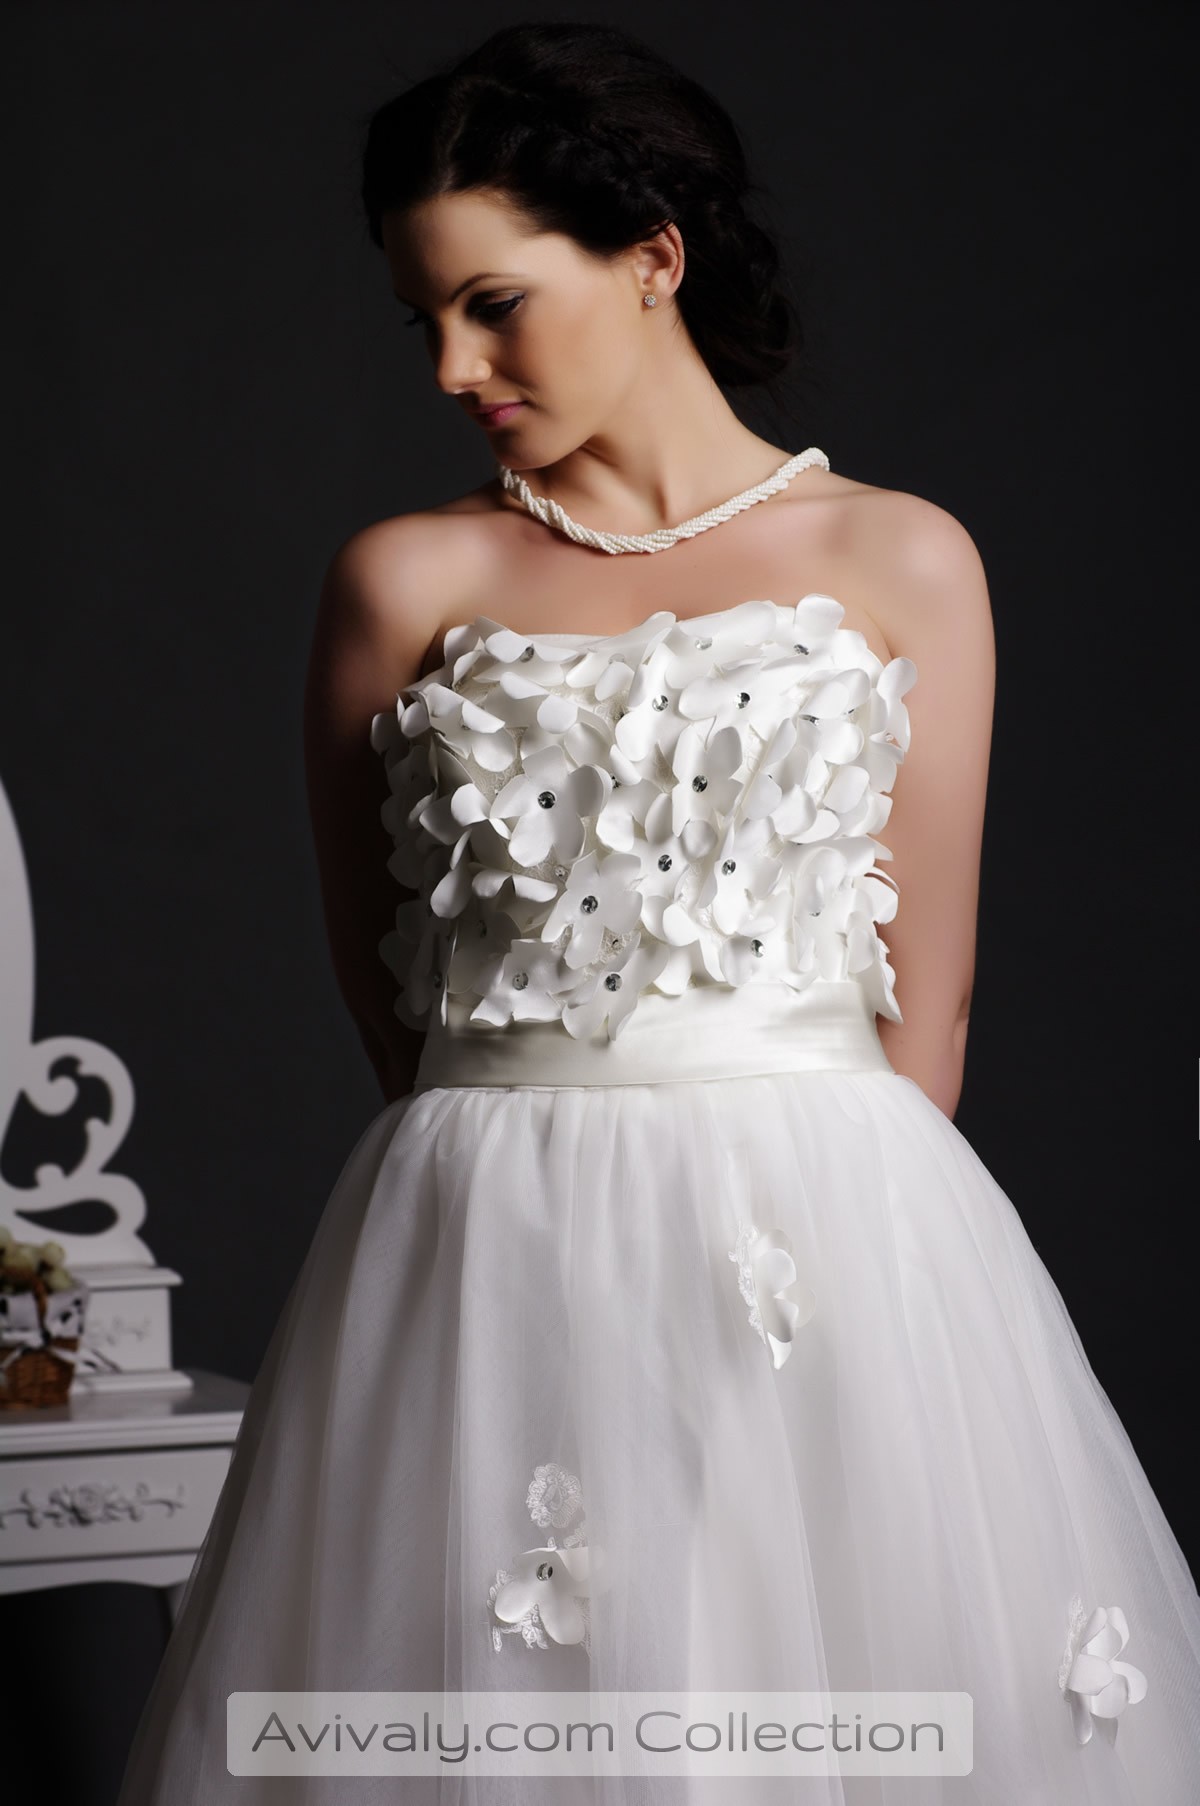 Petal - Flowers with Crystals on Center Shape the Bodice